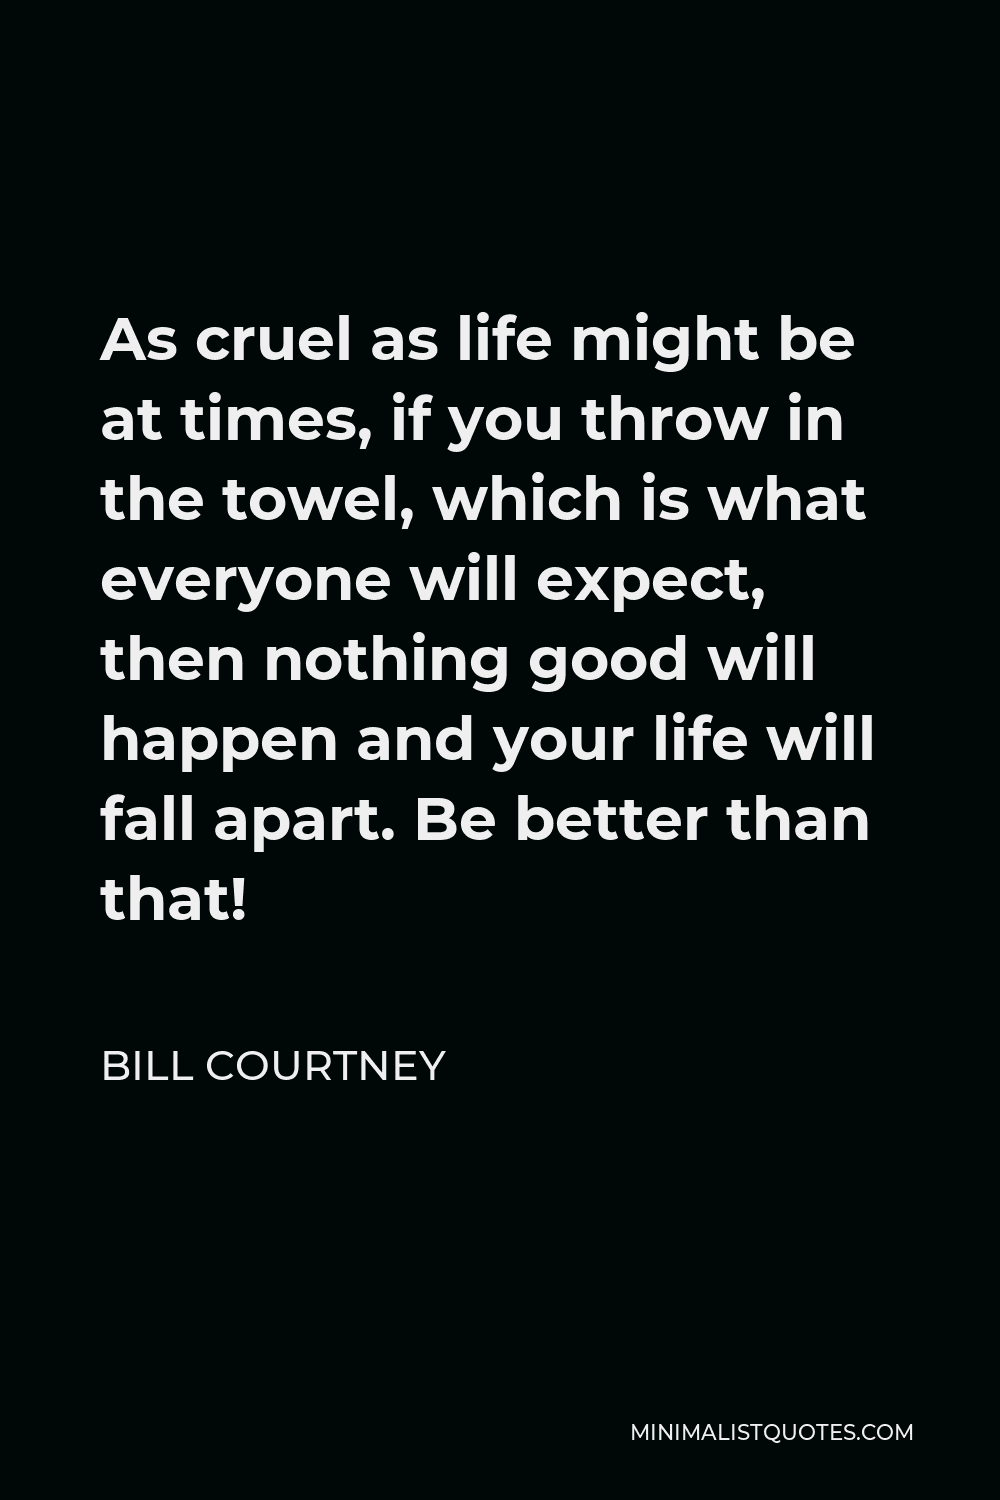 Bill Courtney Quote - As cruel as life might be at times, if you throw in the towel, which is what everyone will expect, then nothing good will happen and your life will fall apart. Be better than that!